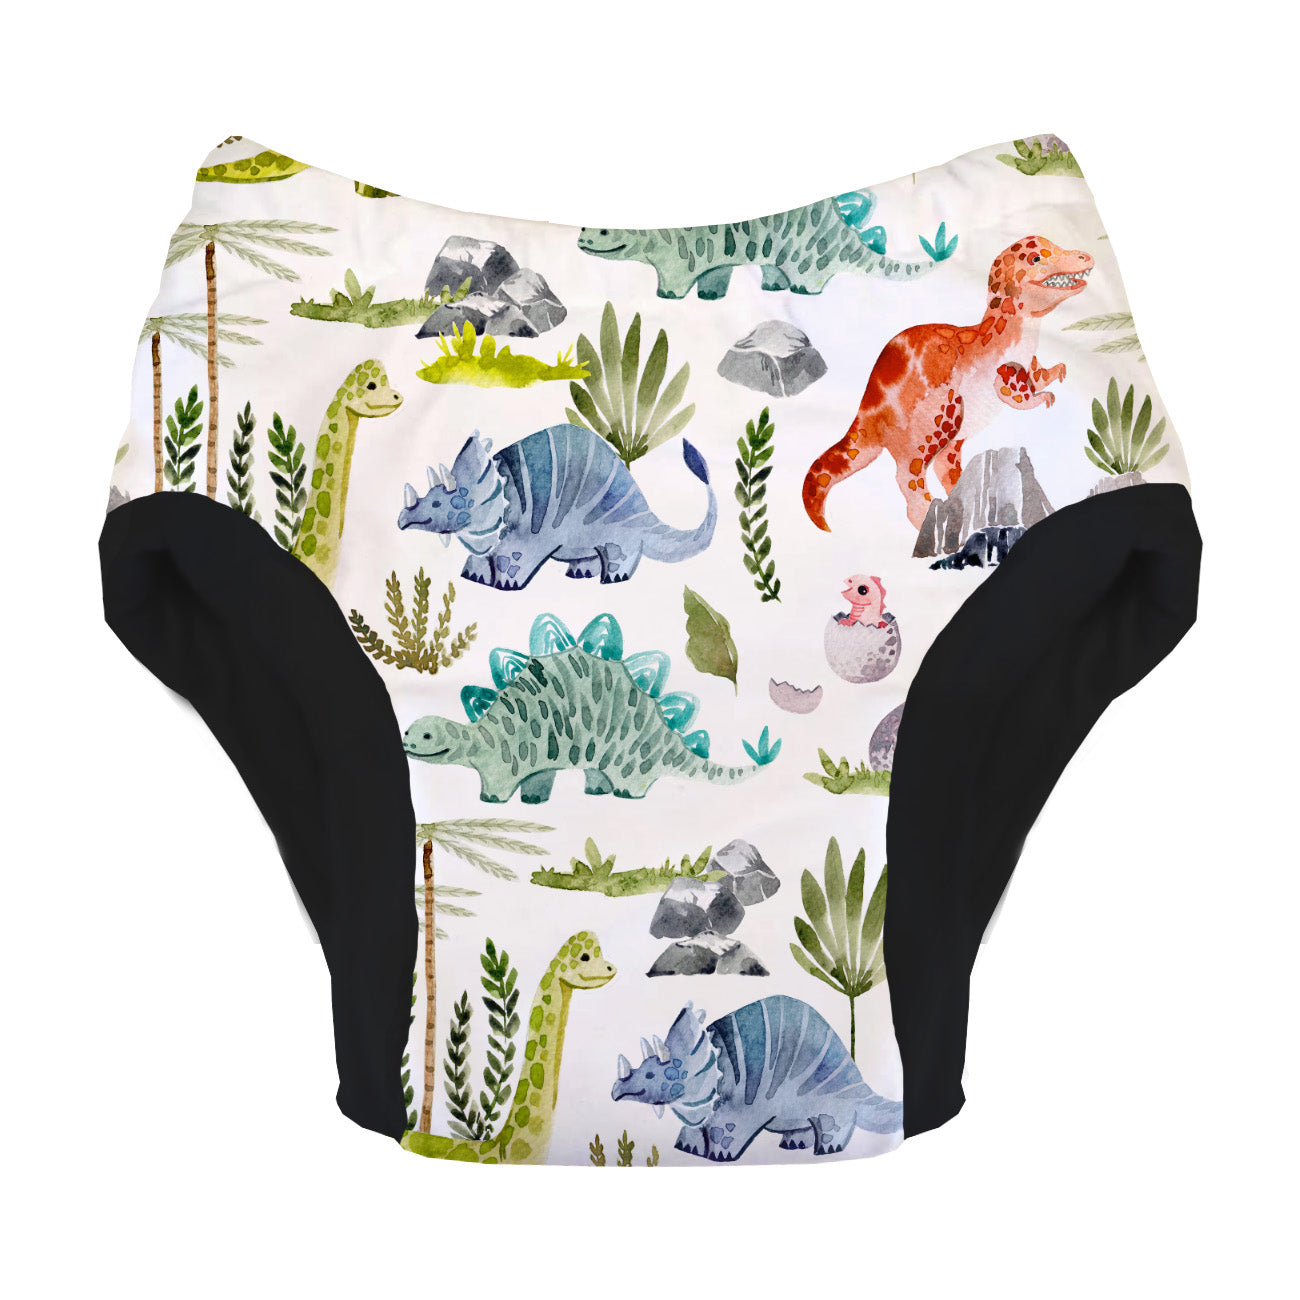 Buy Thirsties Reusable Cloth Potty Training Pant Medium - Rainbow Online at  Low Prices in India 